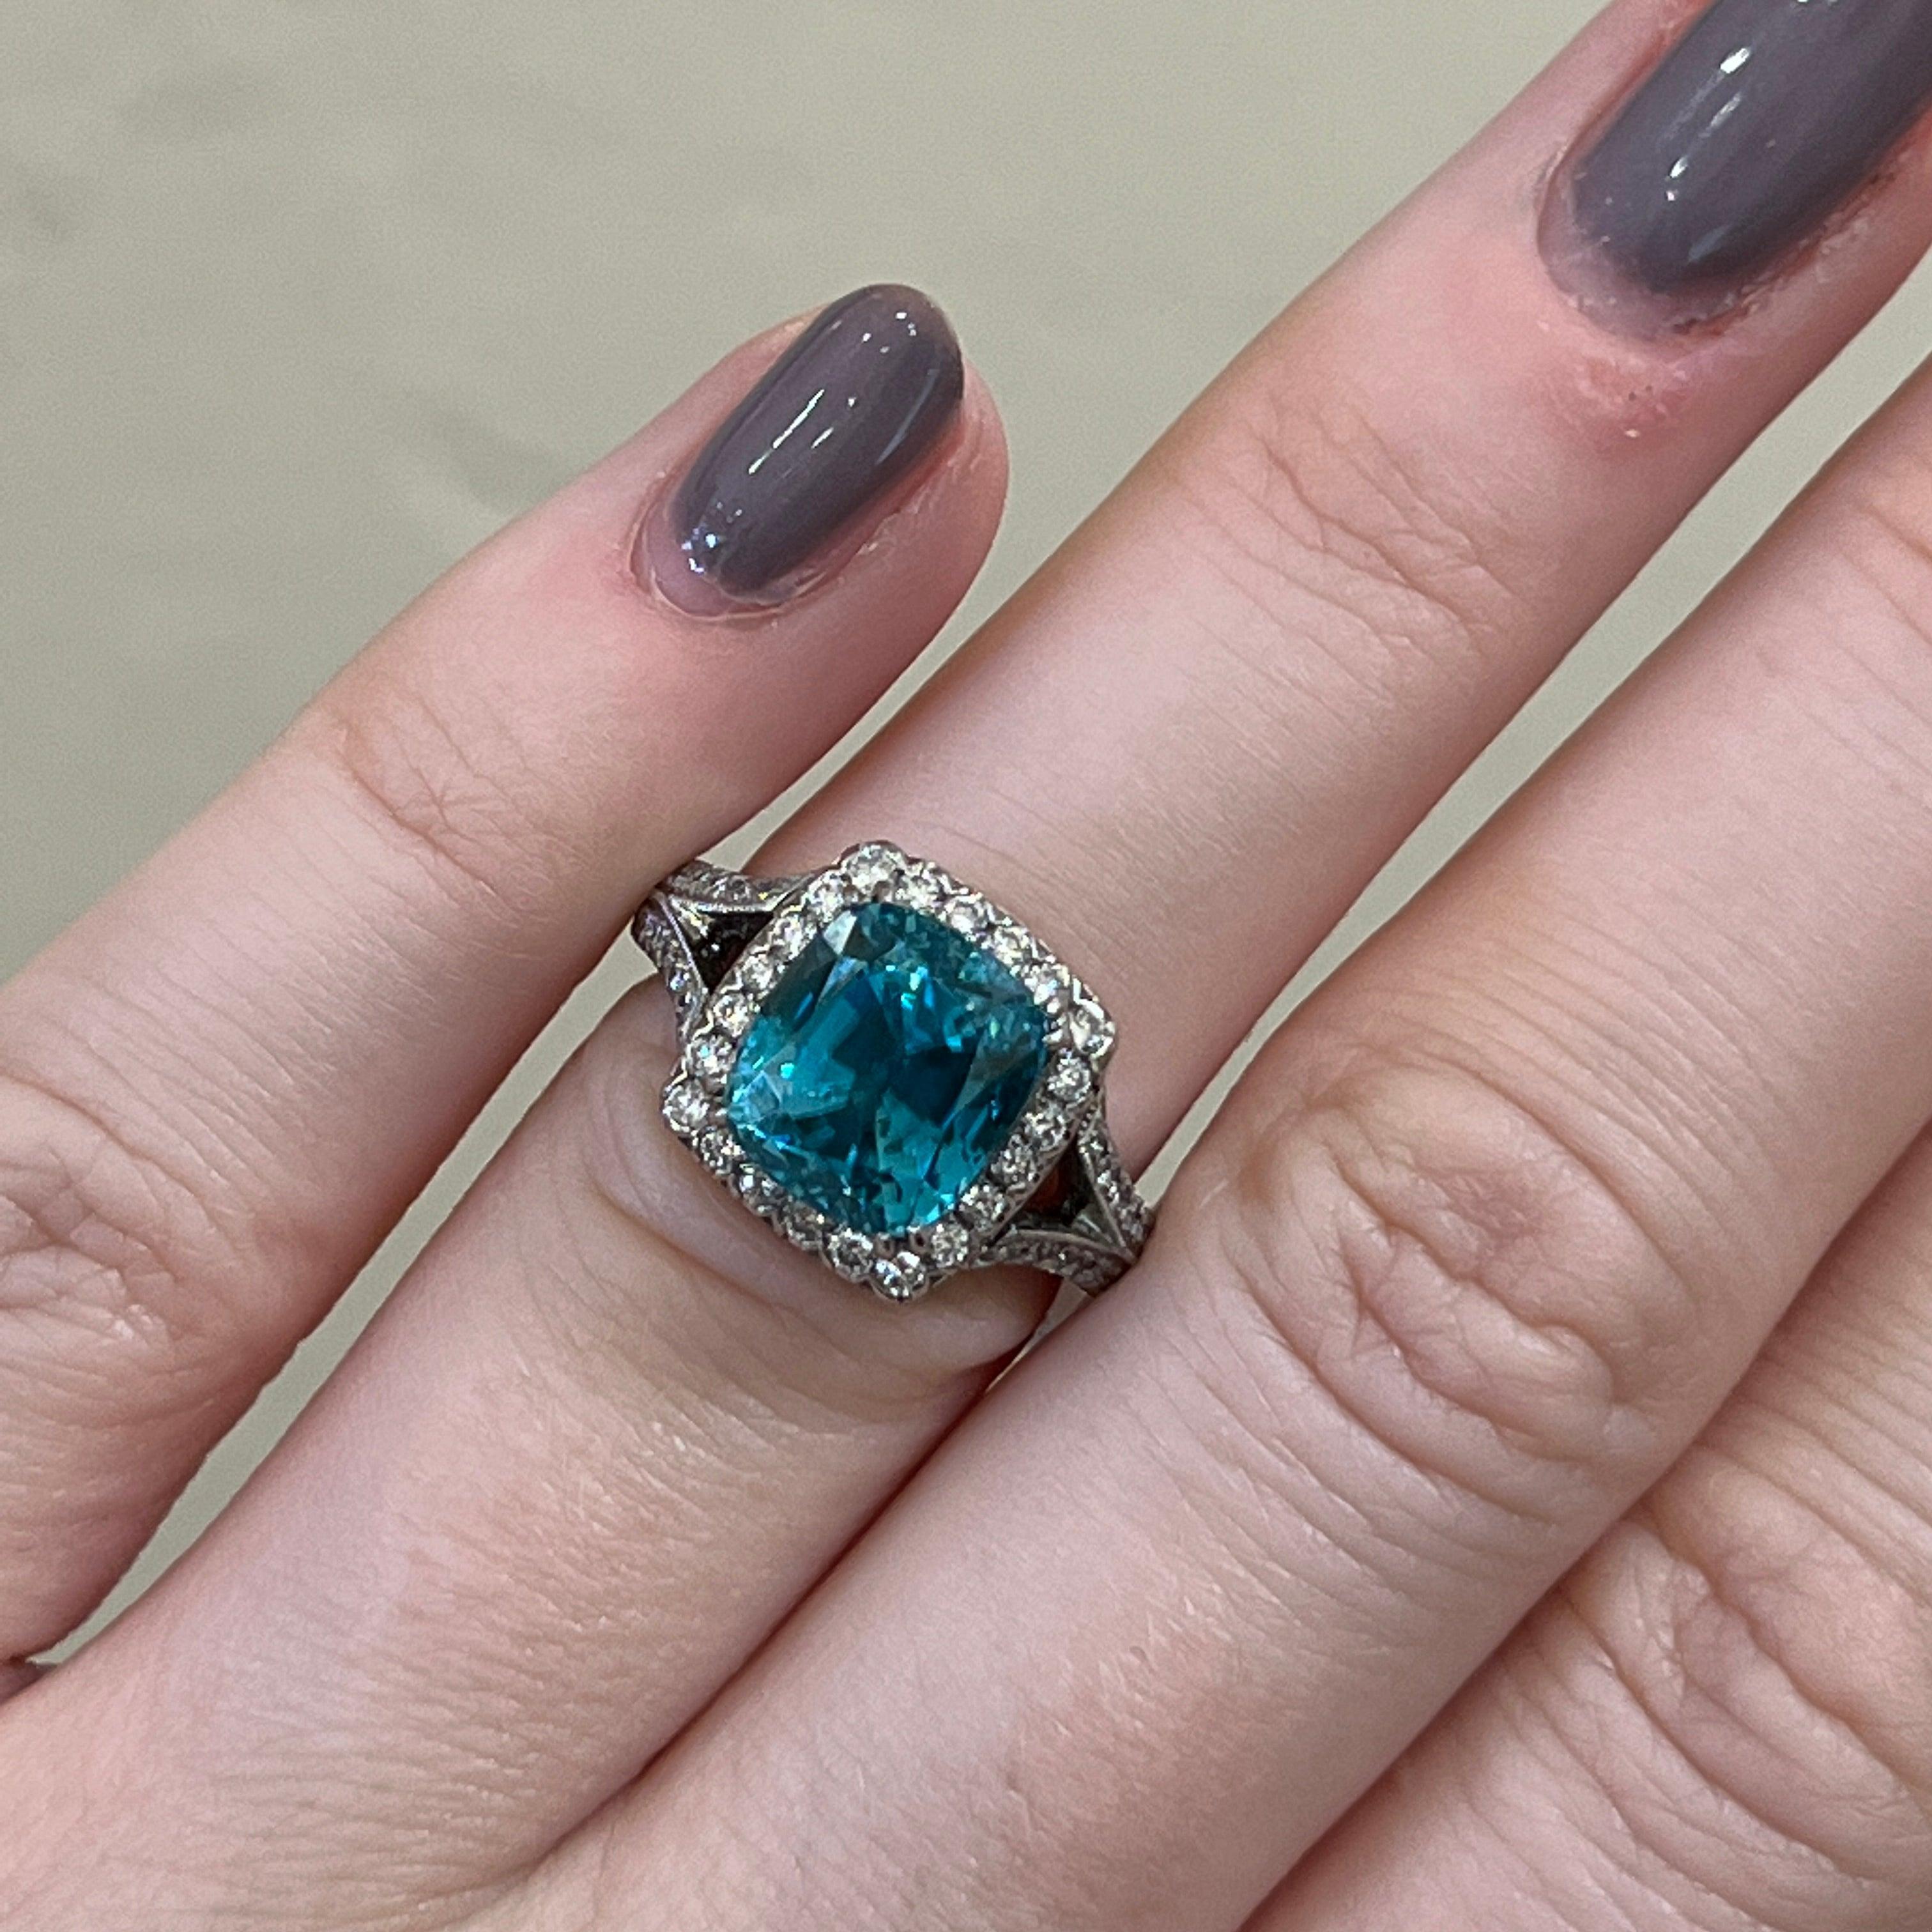 8.28CT Blue Zircon Handmade Diamond Platinum Ring In New Condition For Sale In Carmel-by-the-Sea, CA